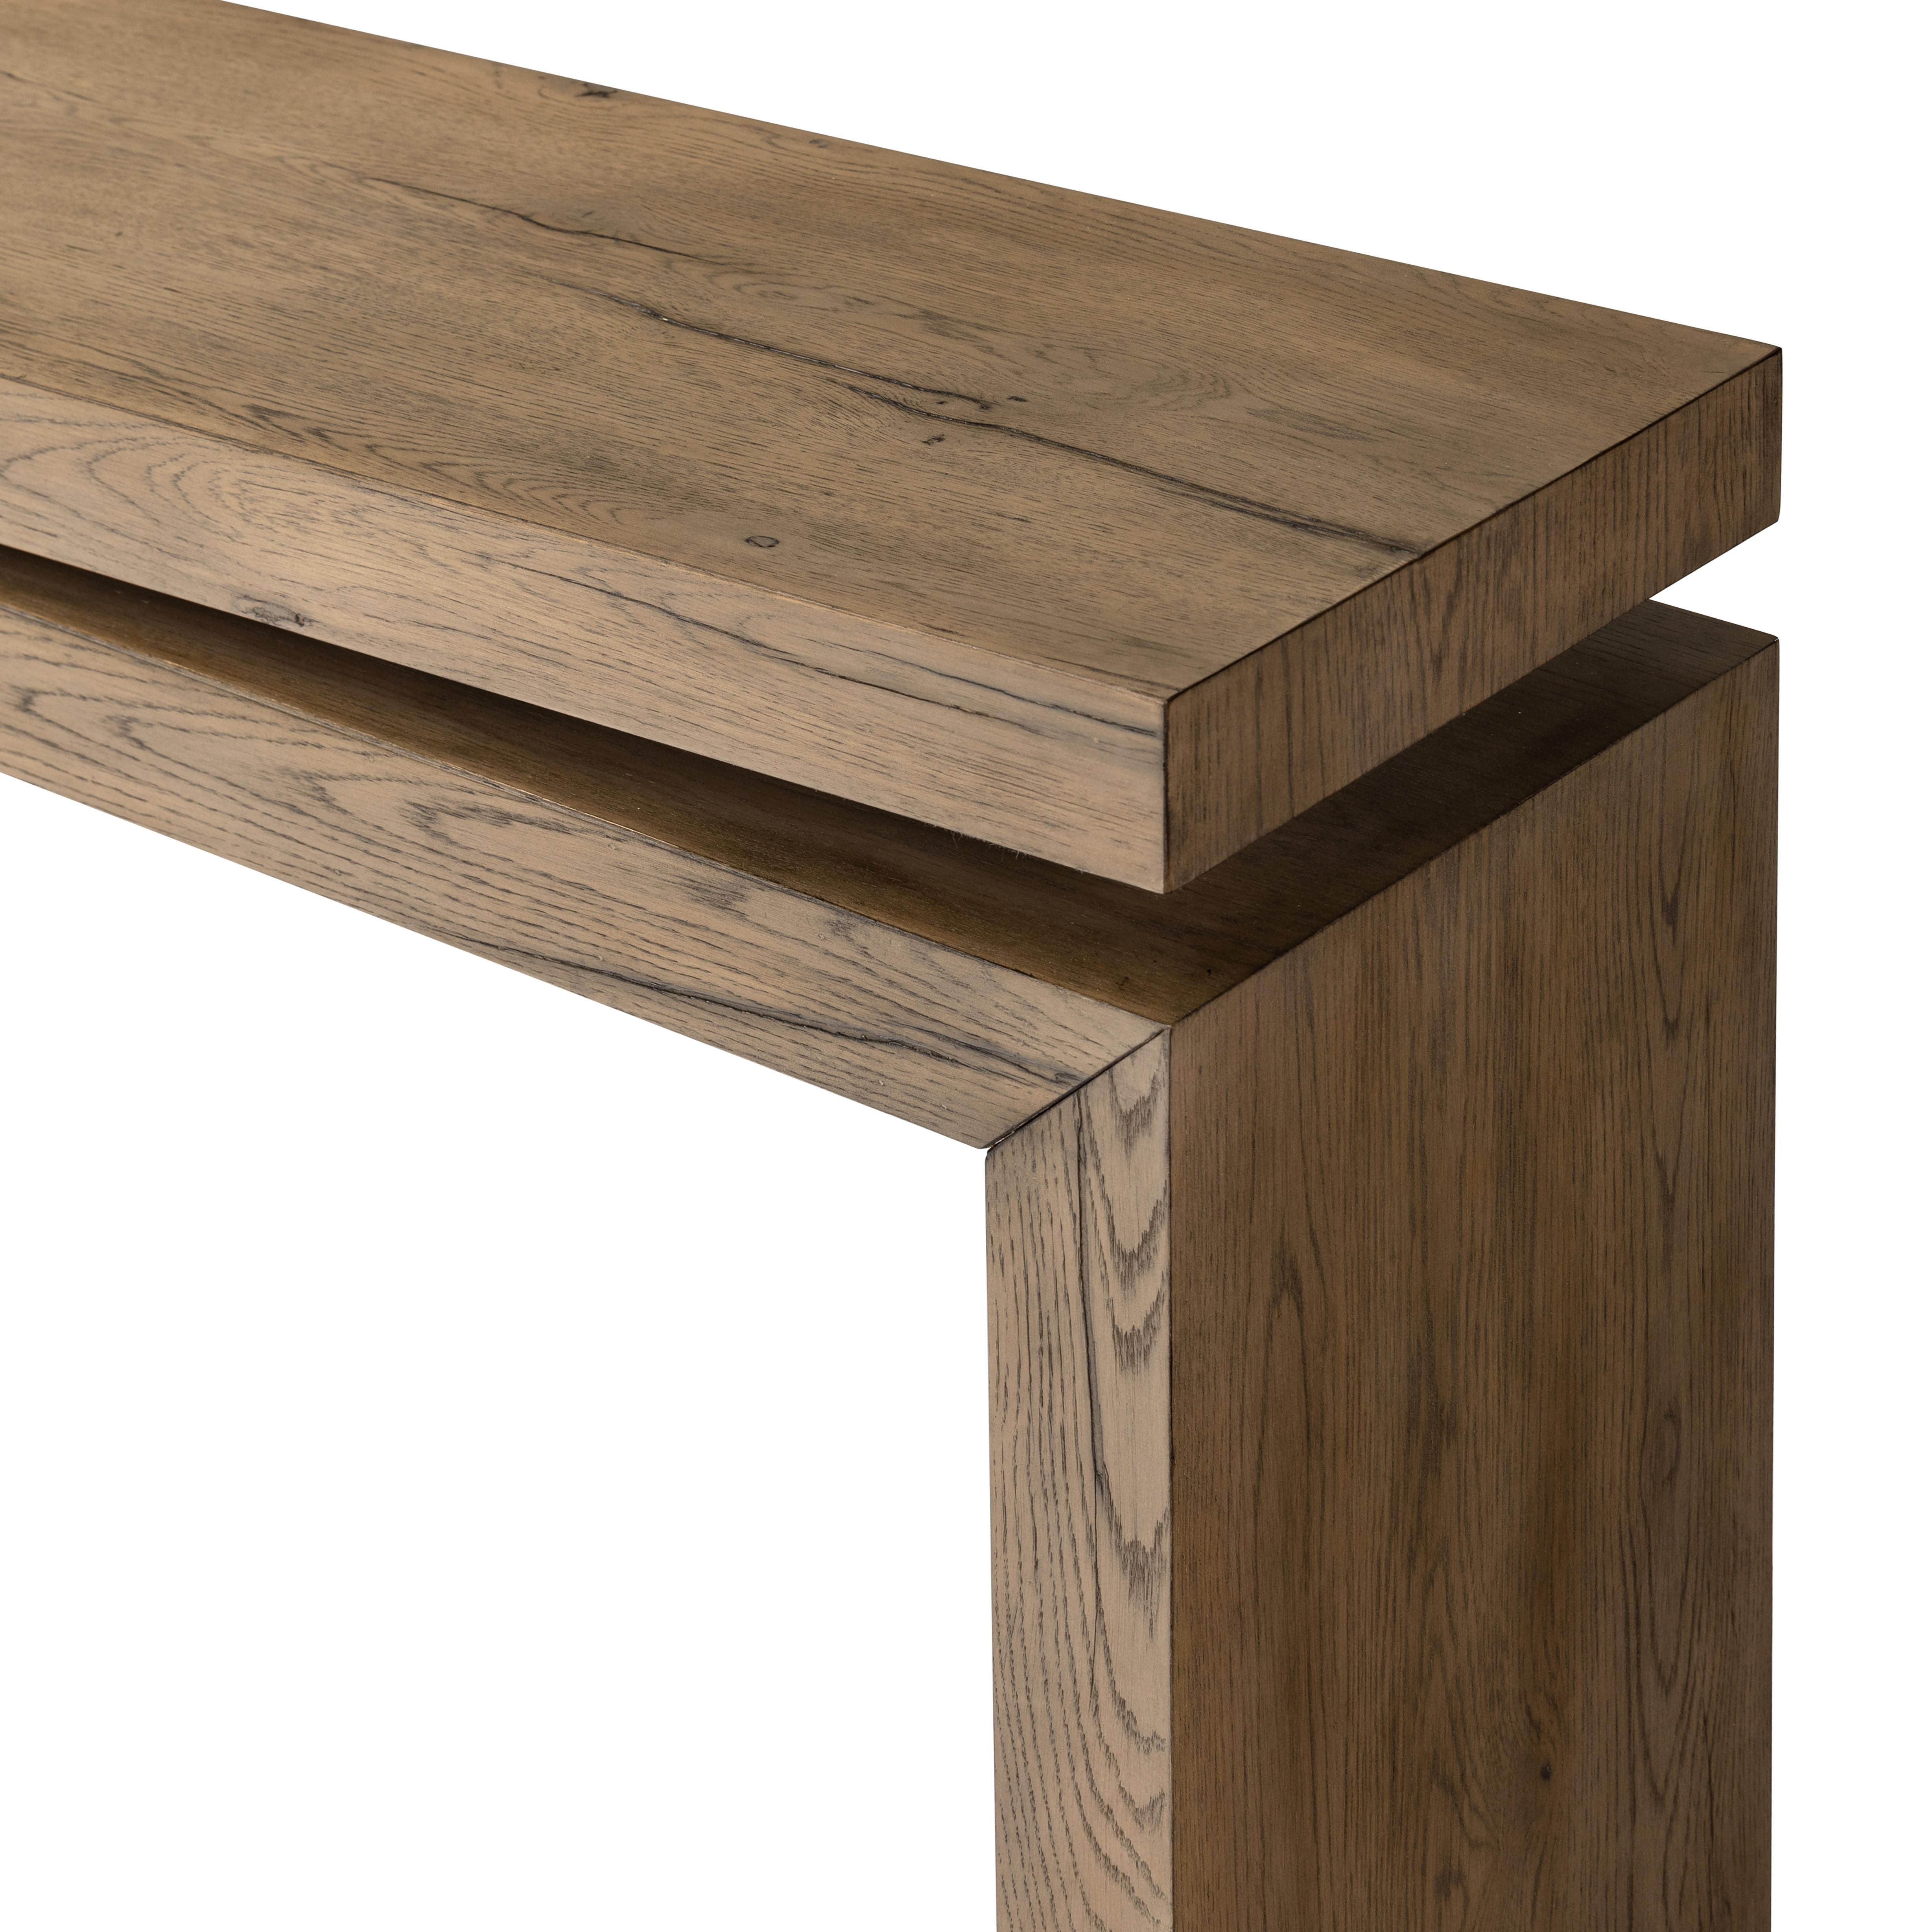 Matthes Console Table-Rustic Natural - Image 4